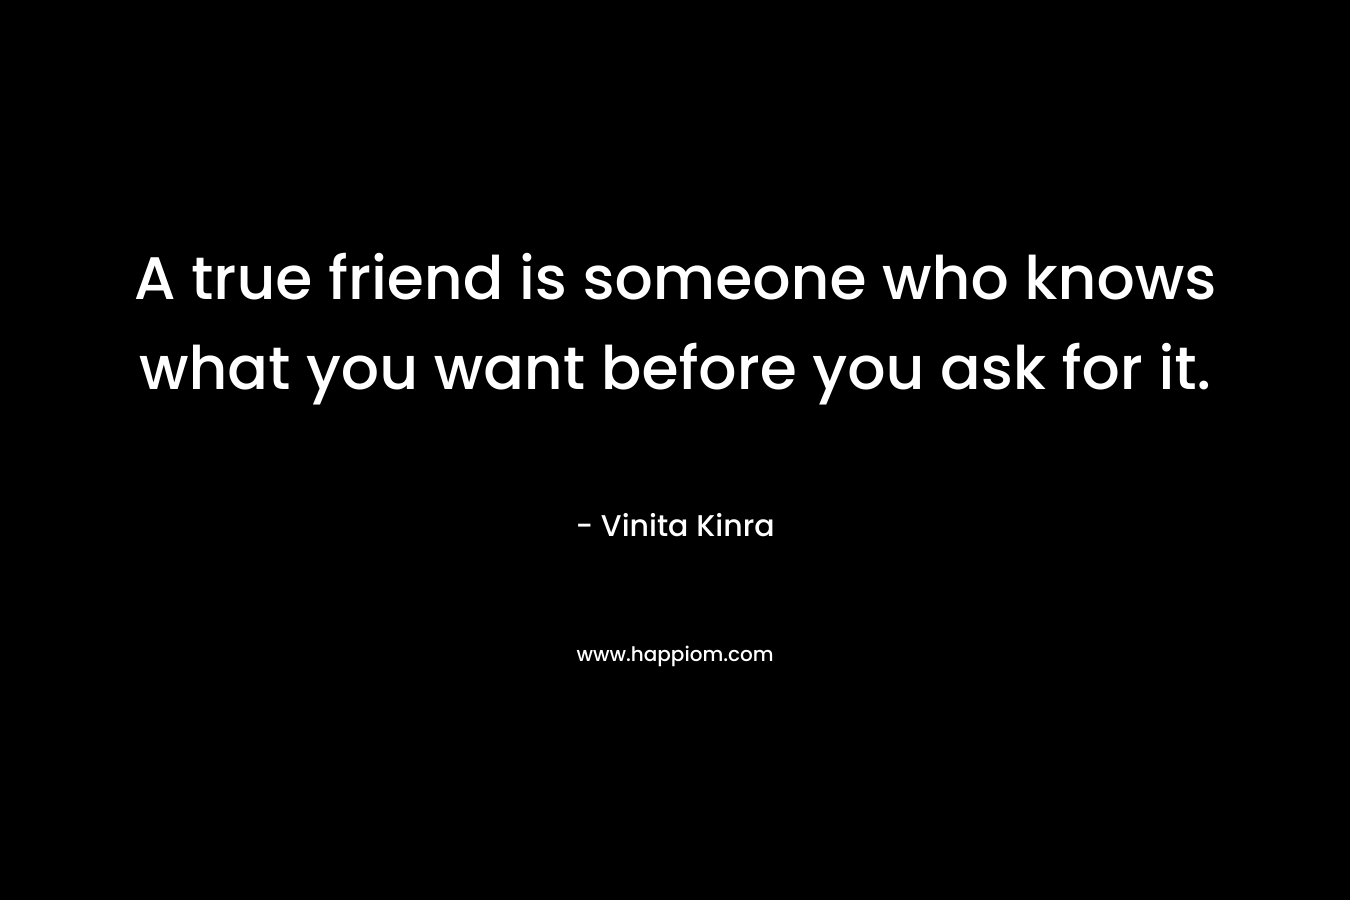 A true friend is someone who knows what you want before you ask for it.